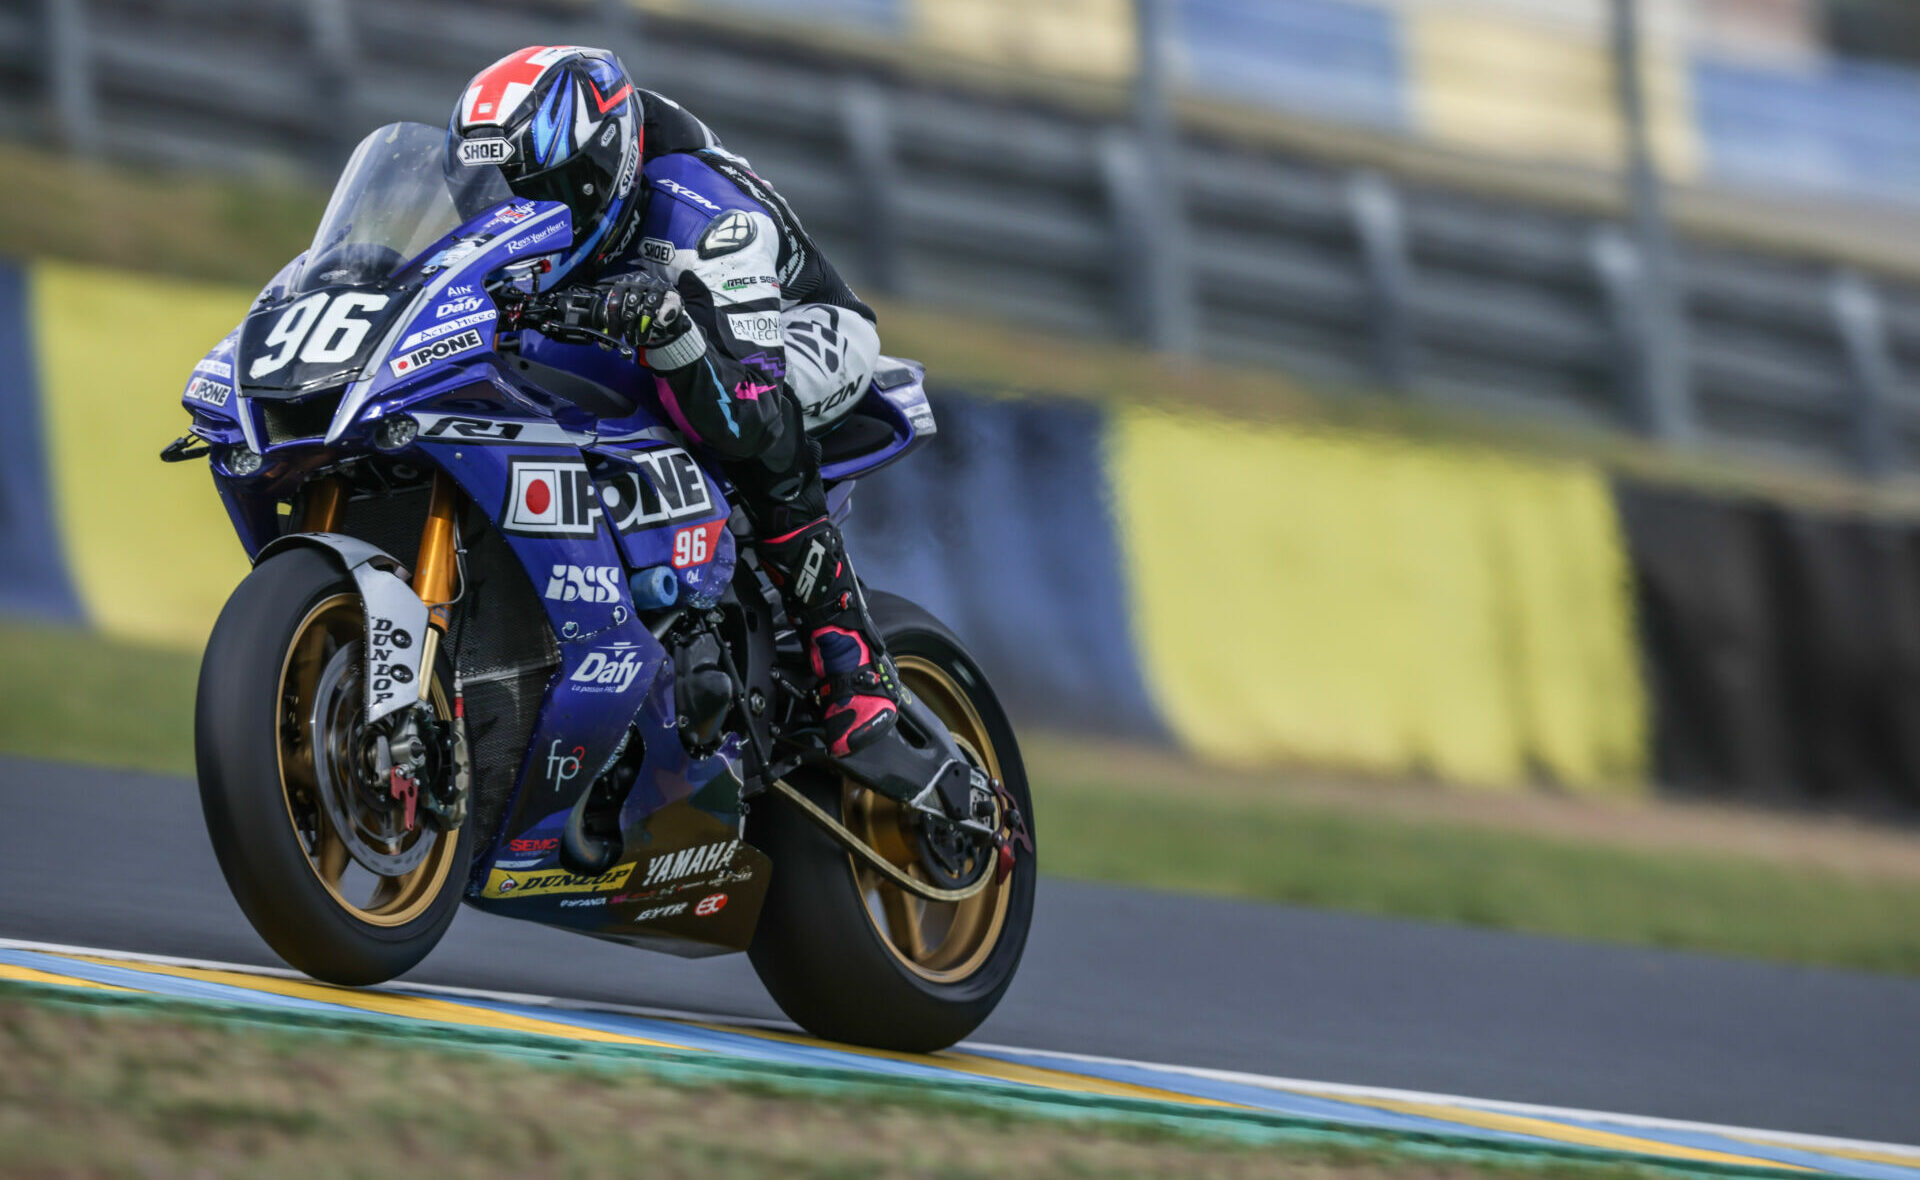 Bradley Smith (96) at speed on the MOTO AIN Yamaha YZF-R1 during a test at Le Mans. Photo courtesy EWC Press Office.